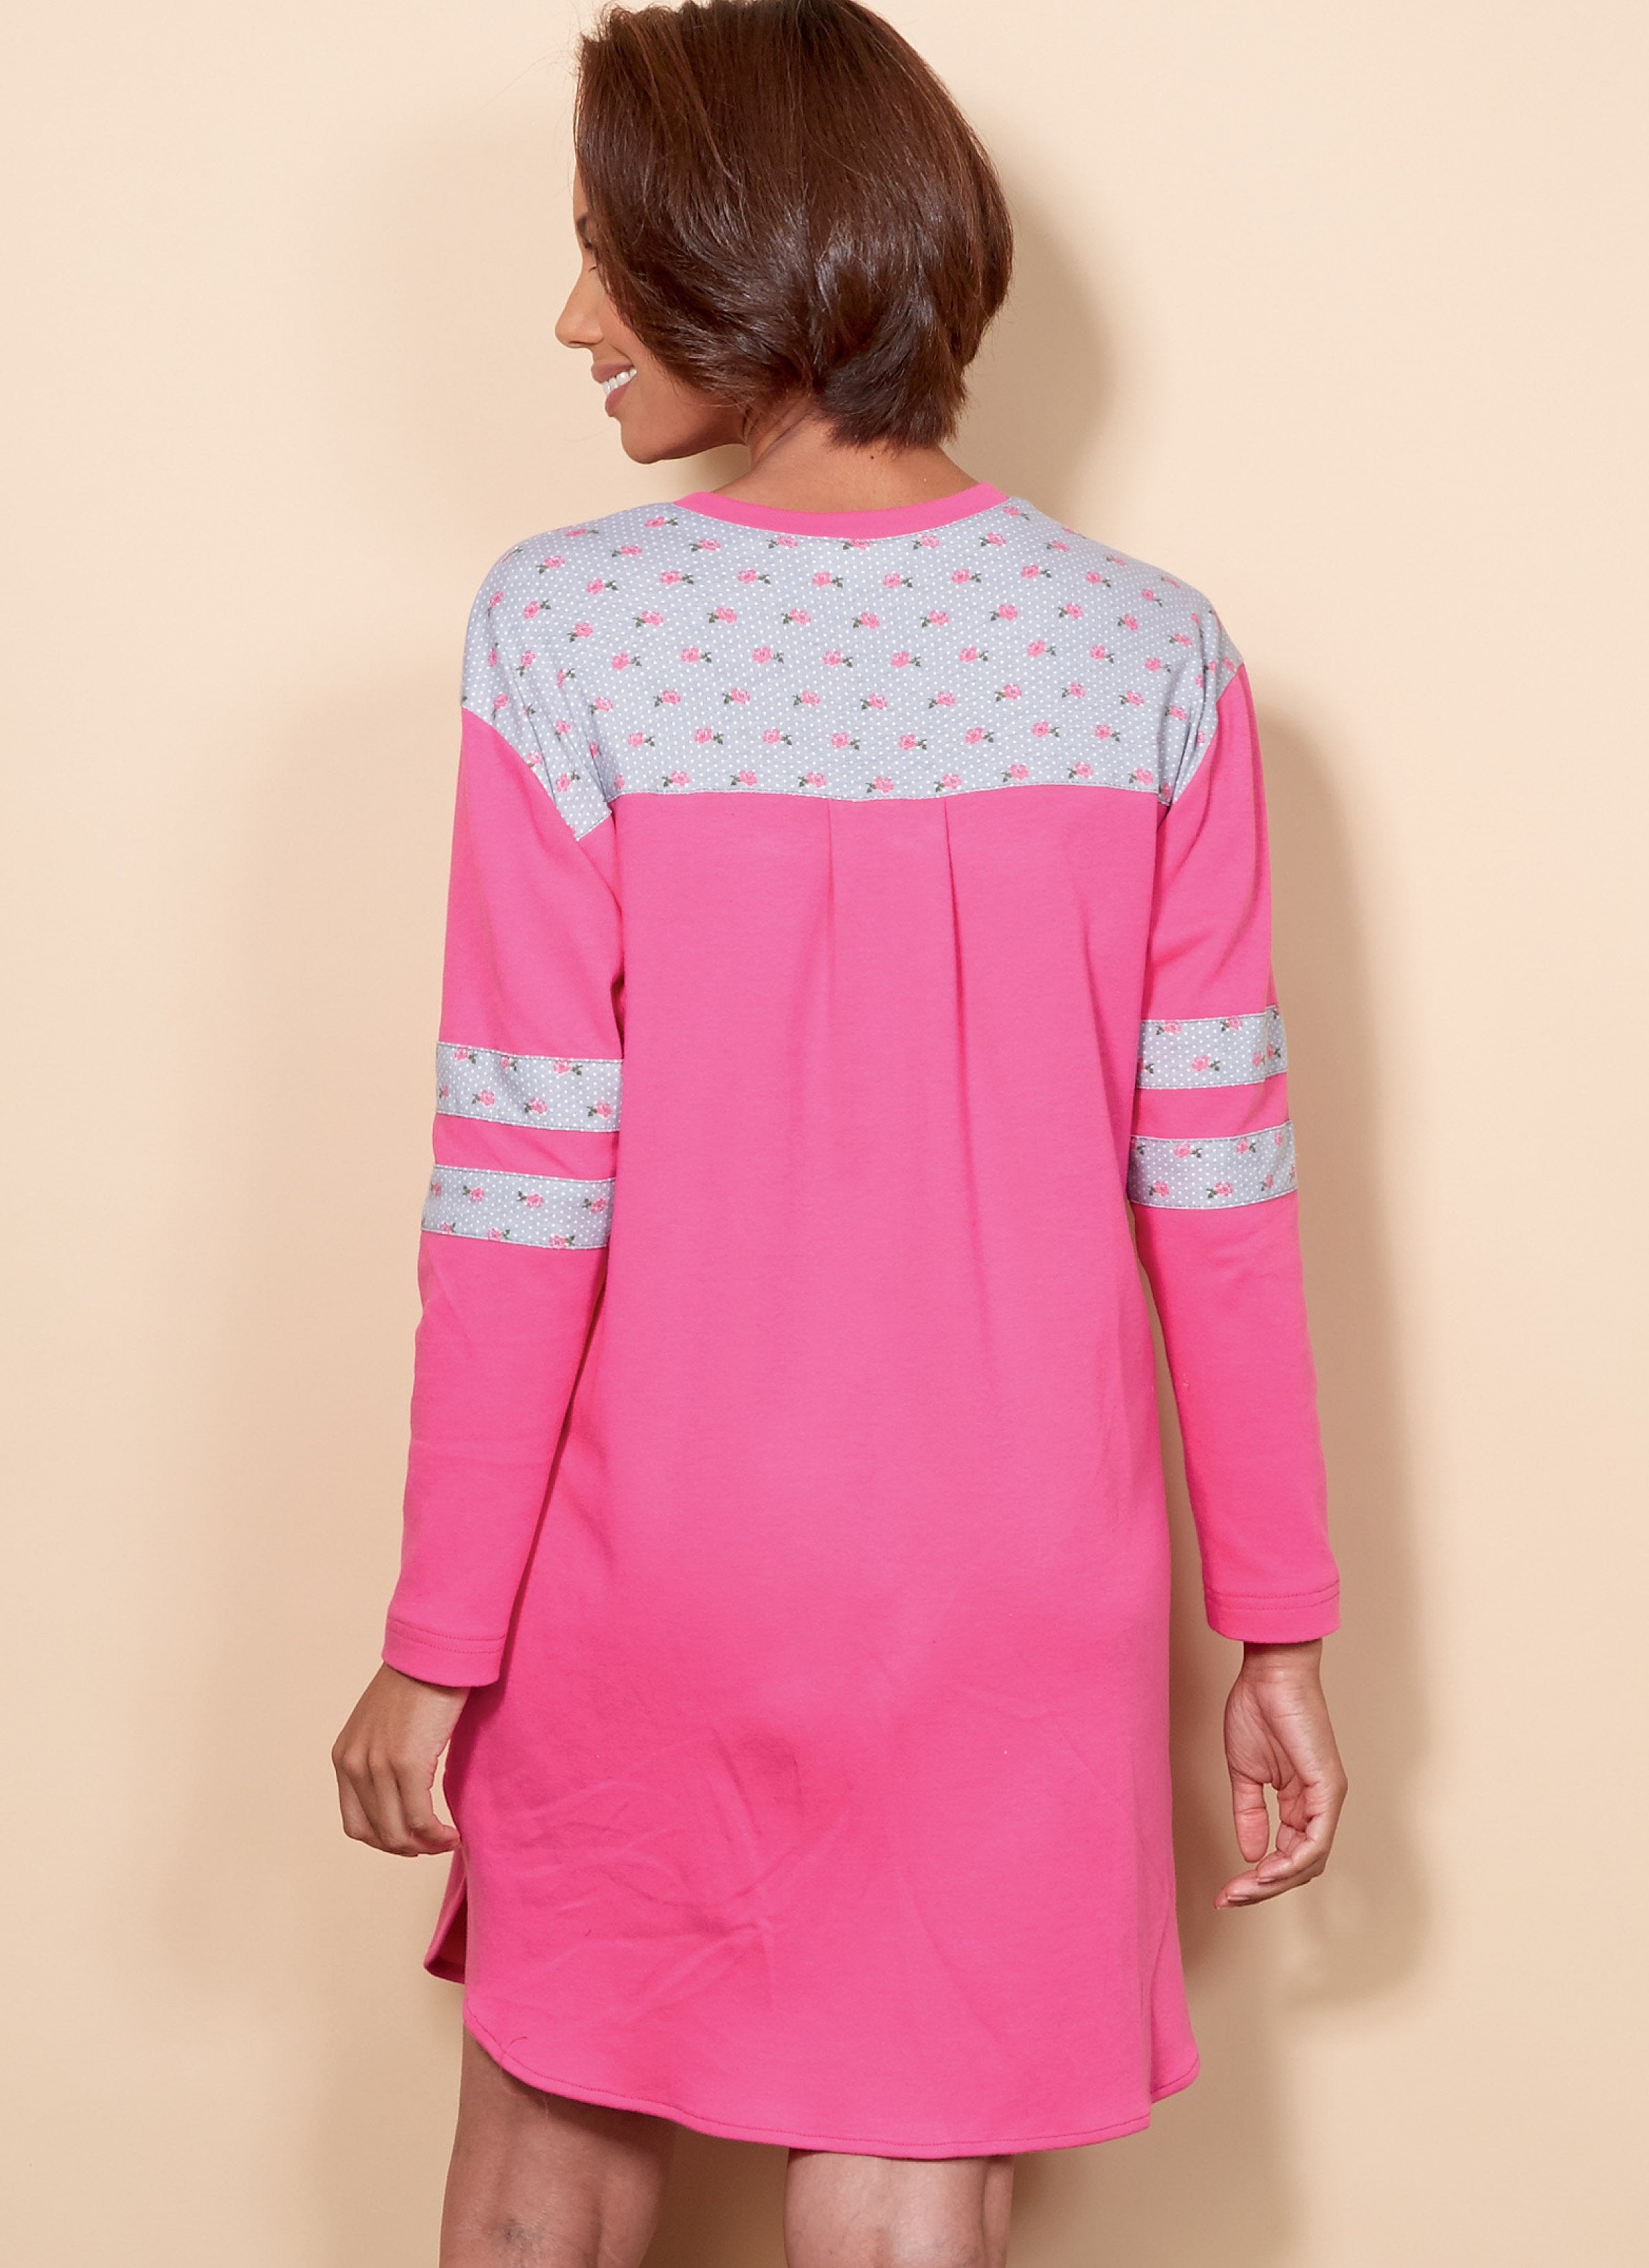 B6531 Top, Tunic, Shorts and Pants | Adults / Children from Jaycotts Sewing Supplies